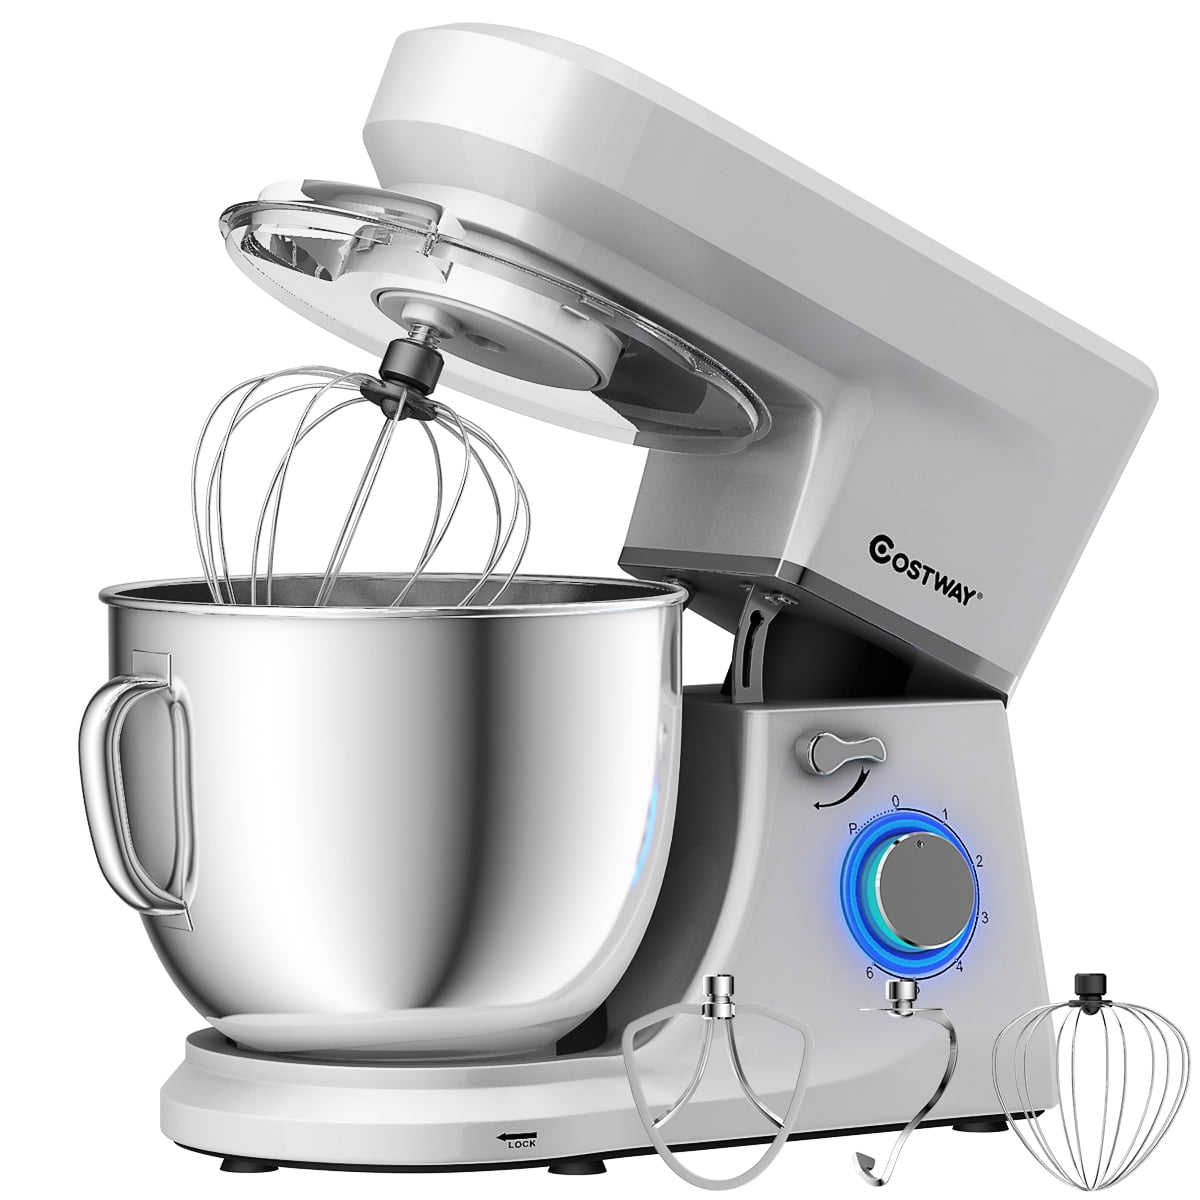 Aucma Stand Mixer 7L Tilt-Head 6 Speed Electric Kitchen Mixer with Dough  Hook Wire Whip & Beater 1400W Red